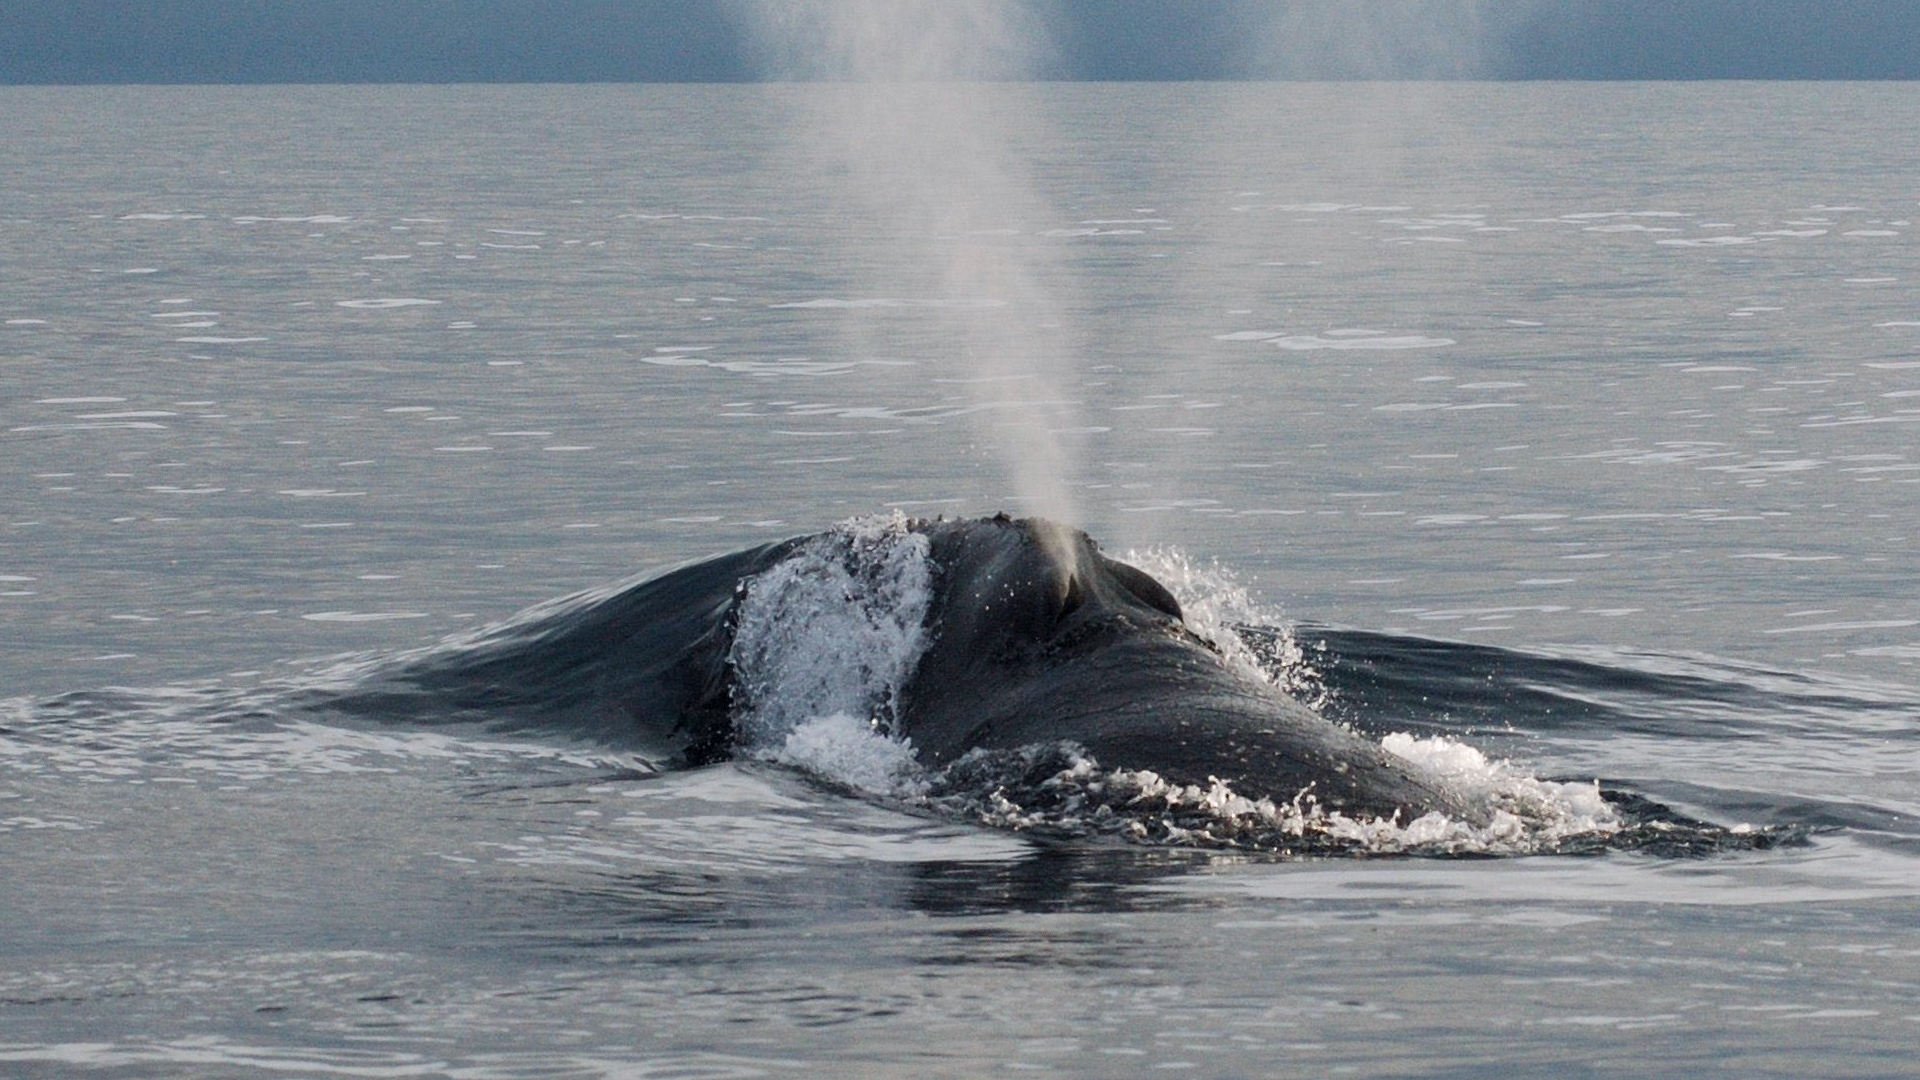 The top of a right whale’s head emerges. Both nostrils of its blowhole are wide open and the whale’s V-shaped spout is clearly visible.